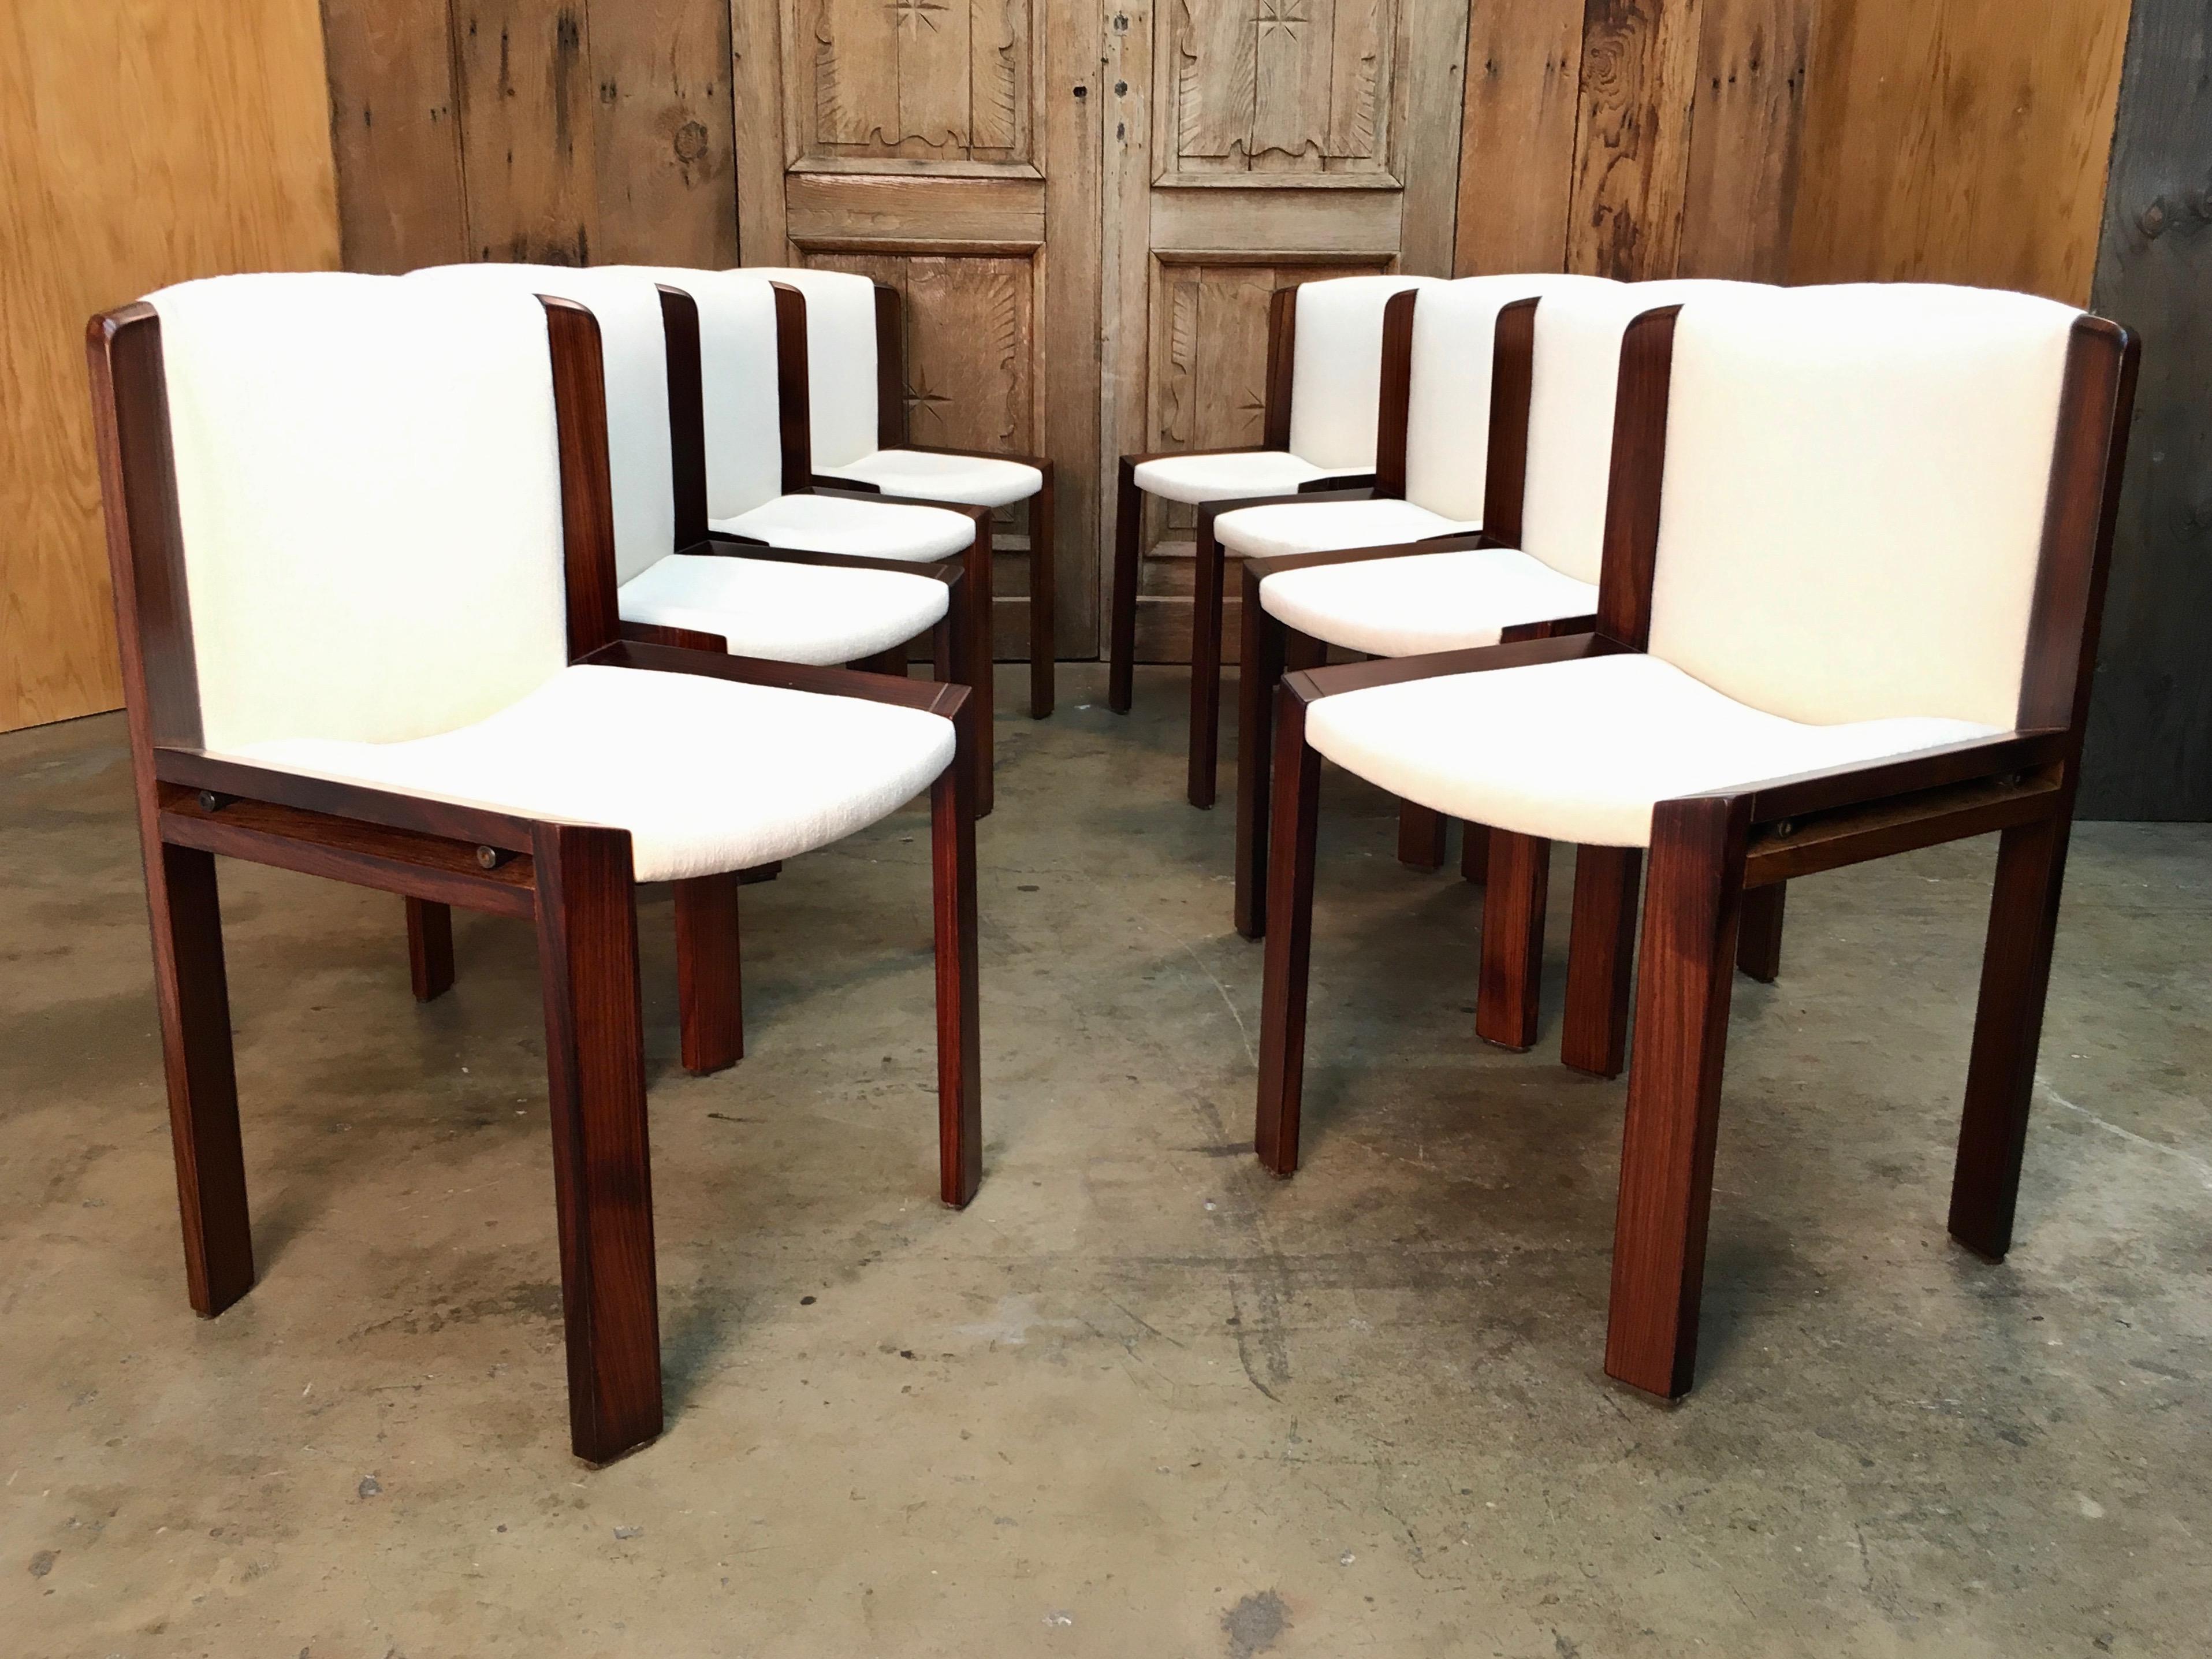 Italian design by Joe Colombo 1960s lightly refinished with new upholstery very rare to have a set of eight.